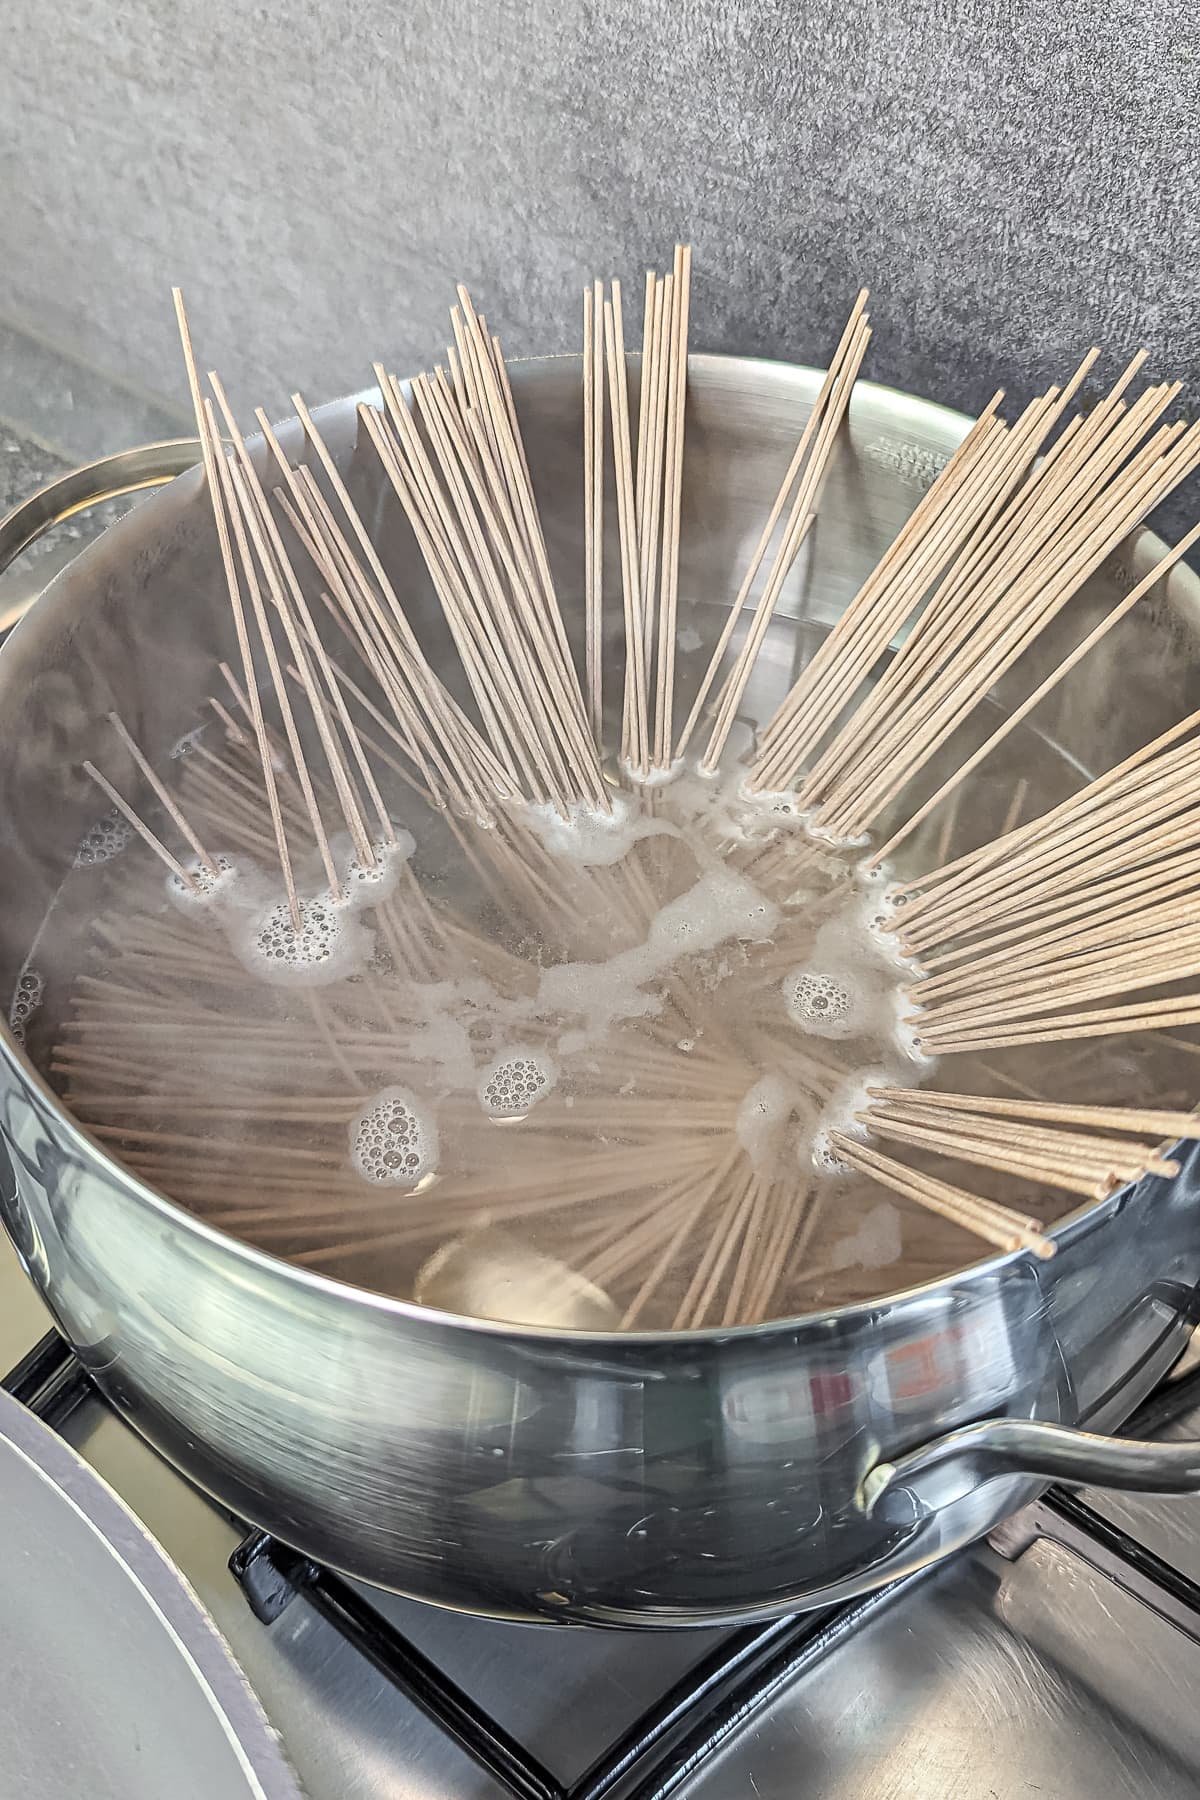 Soba noodles boiling in a pot of water on a stove.